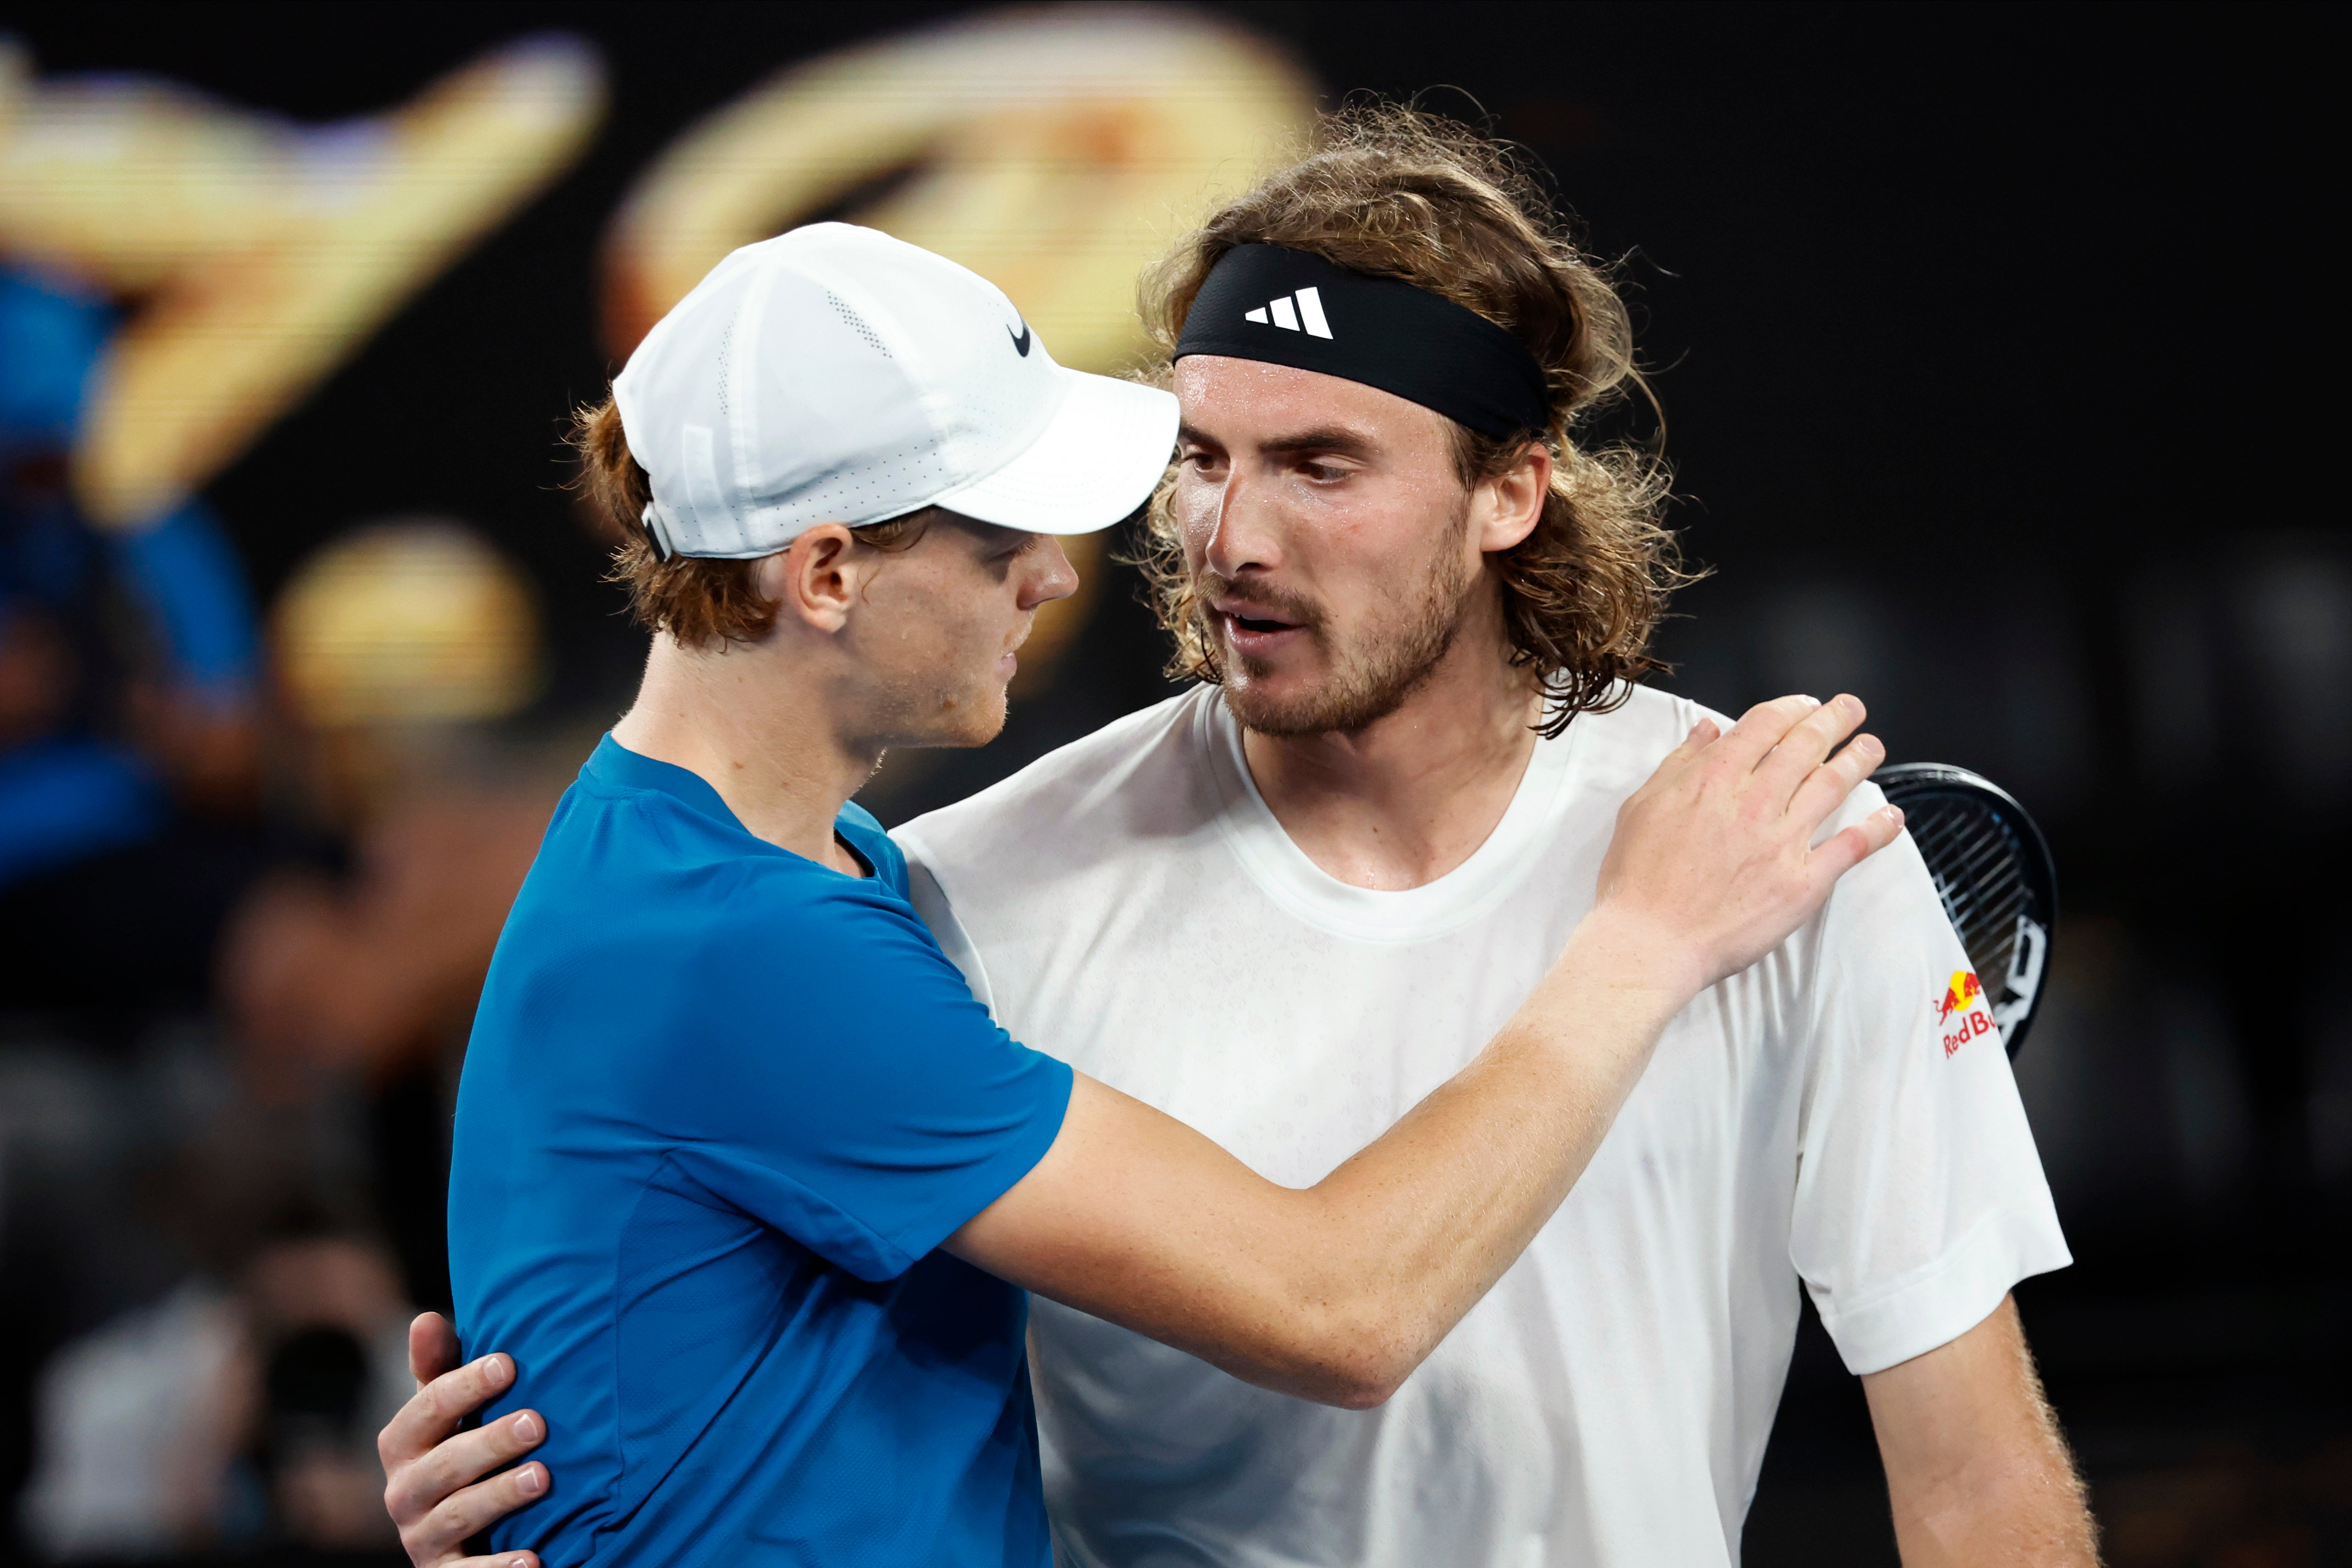 Stefanos Tsitsipas, right, consoles Jannik Sinner at the net after his victory in Melbourne